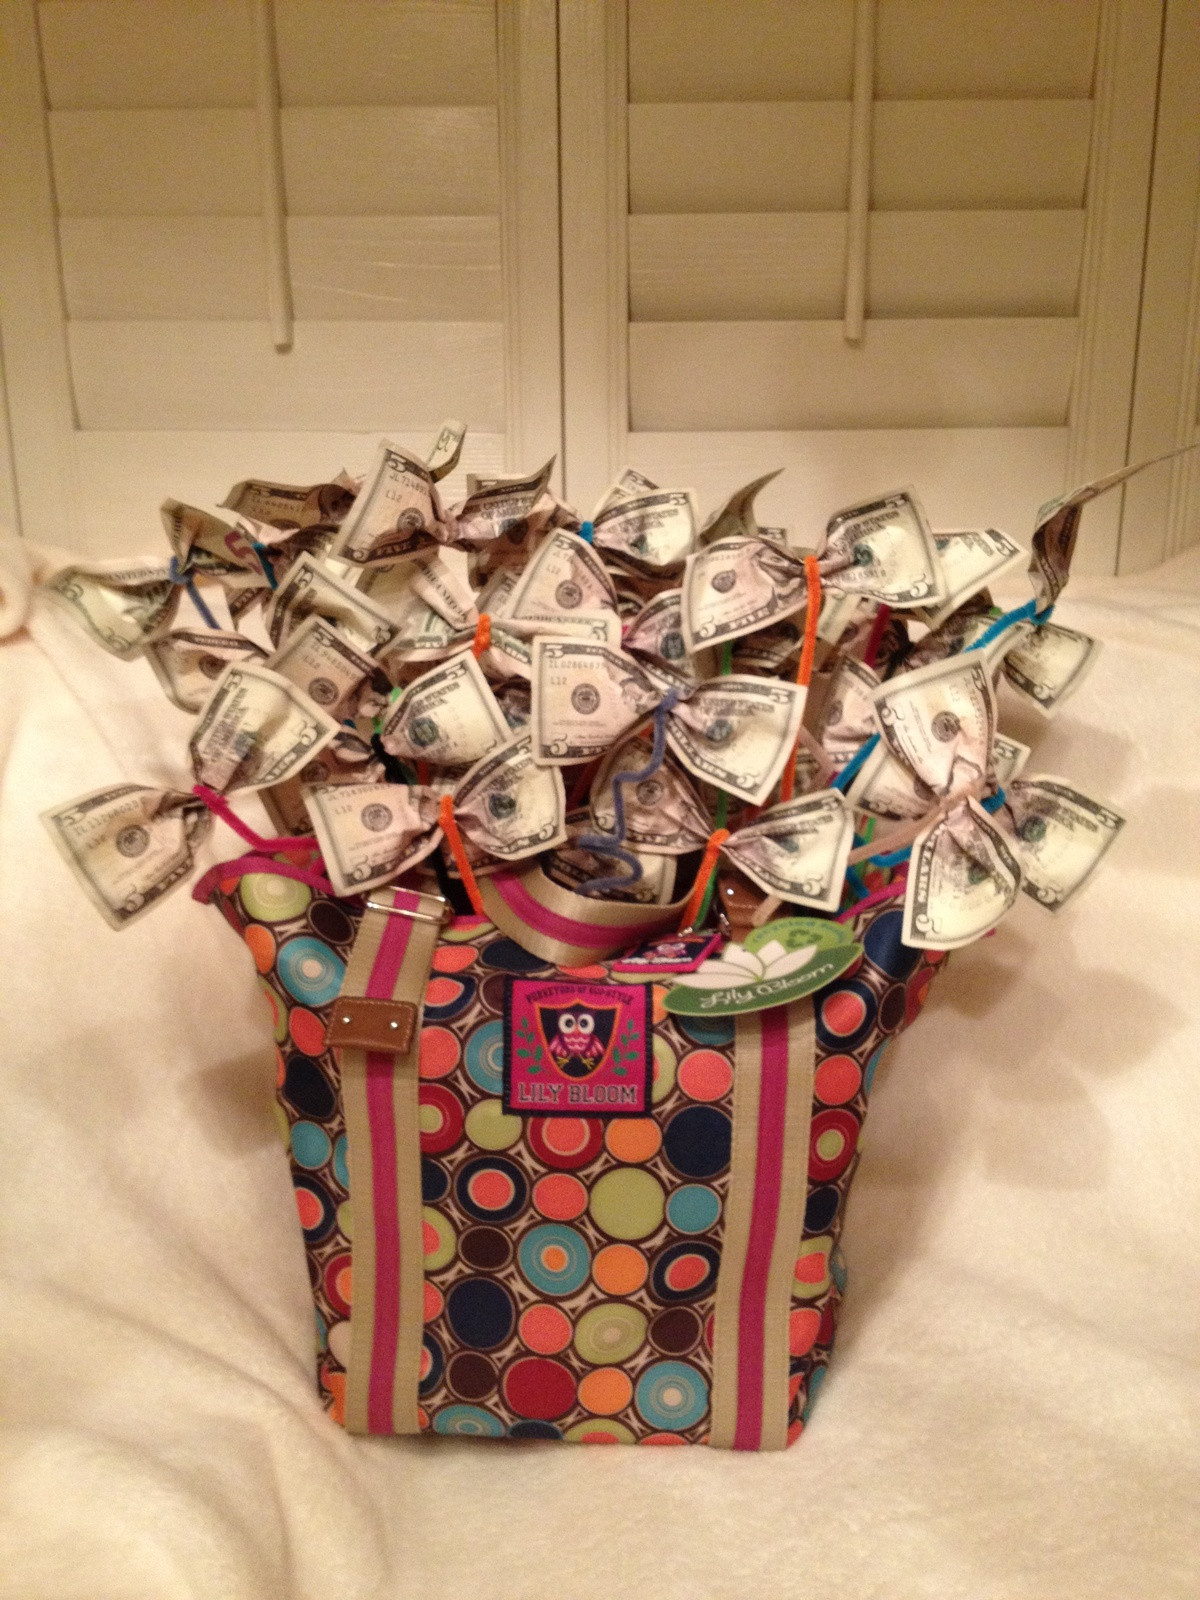 Gift Basket Ideas For Fundraising
 1000 images about Fundraising baskets on Pinterest